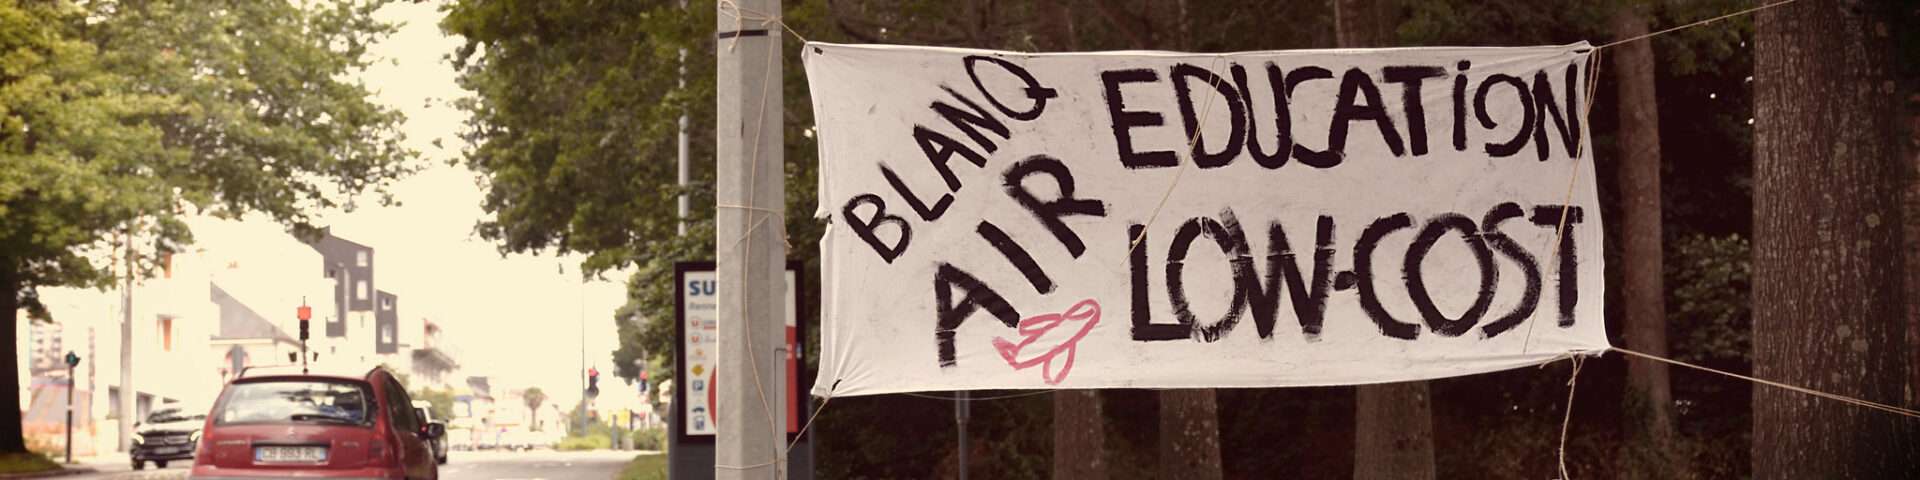 Banderole "Blank Air Education Low cost"